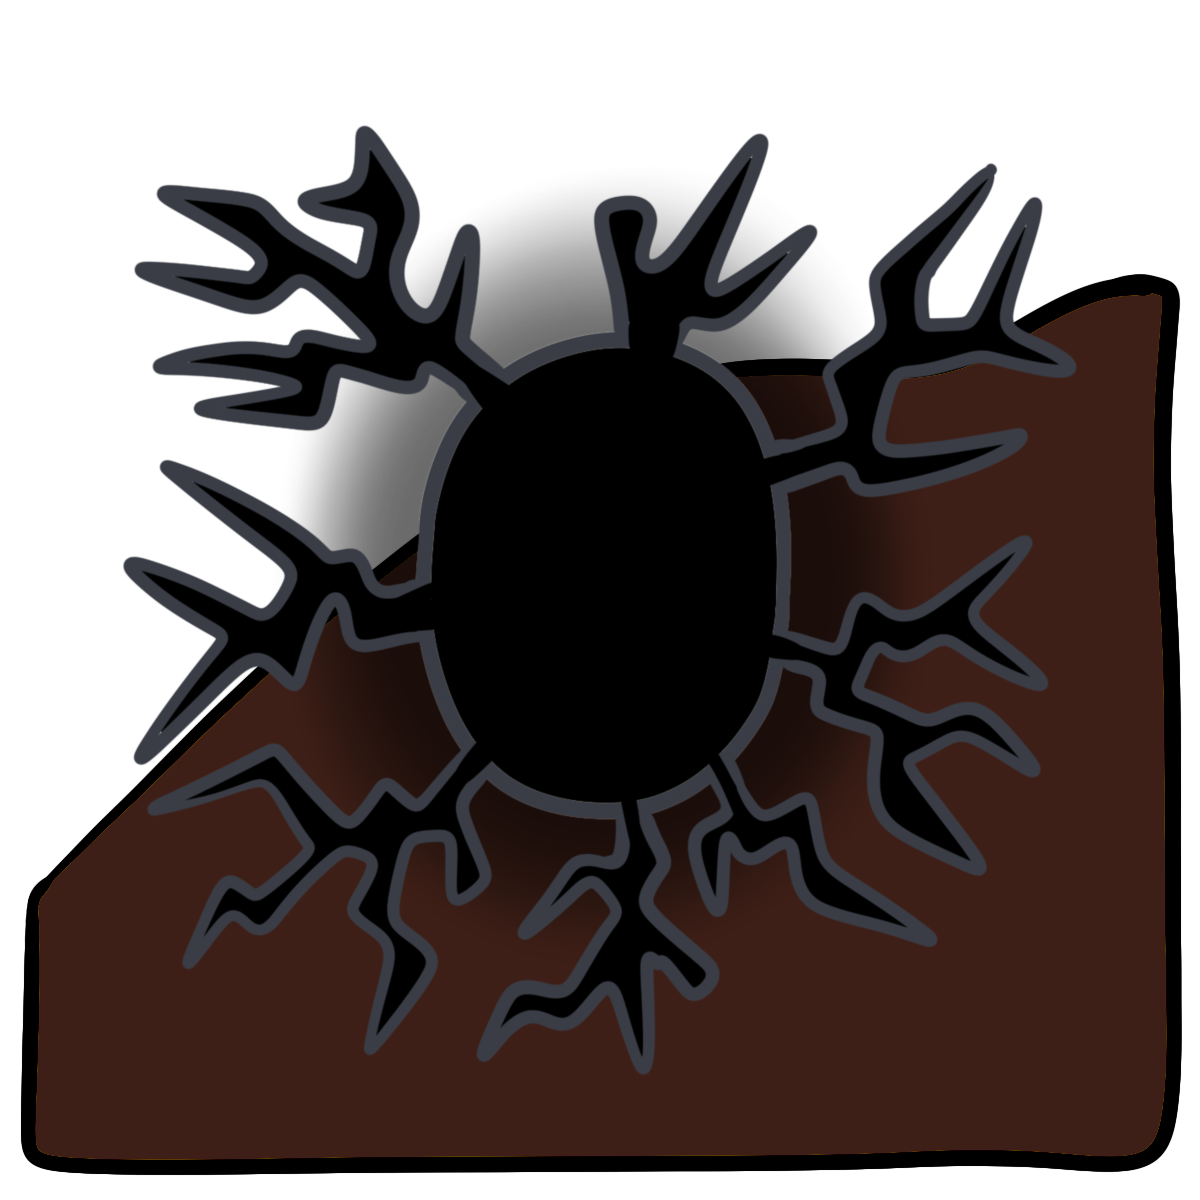 A black glowing oval with branching pointy lines coming from its sides. Curved dark brown skin fills the bottom half of the background.